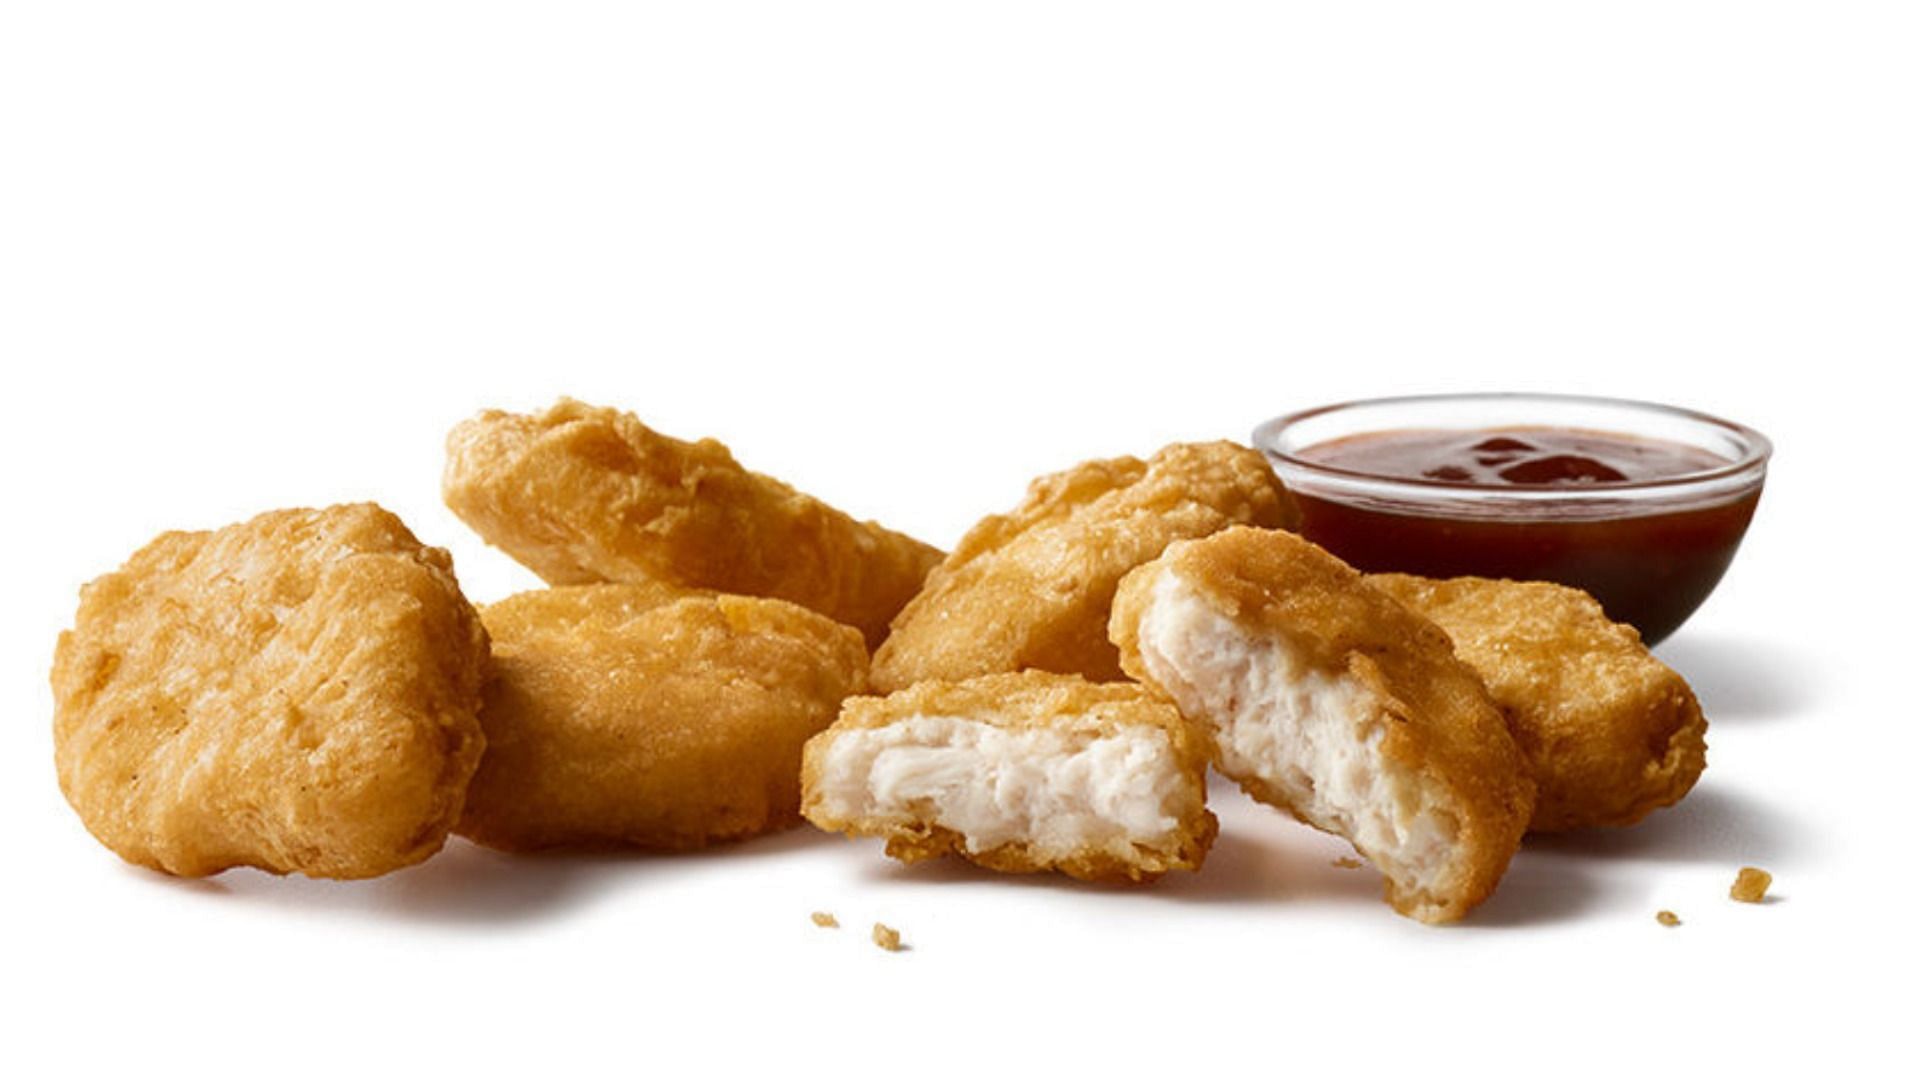 McDonald&#039;s is offering 6-piece chicken nuggets for $1 if you take a personality quiz (Image via mcdonalds.com)